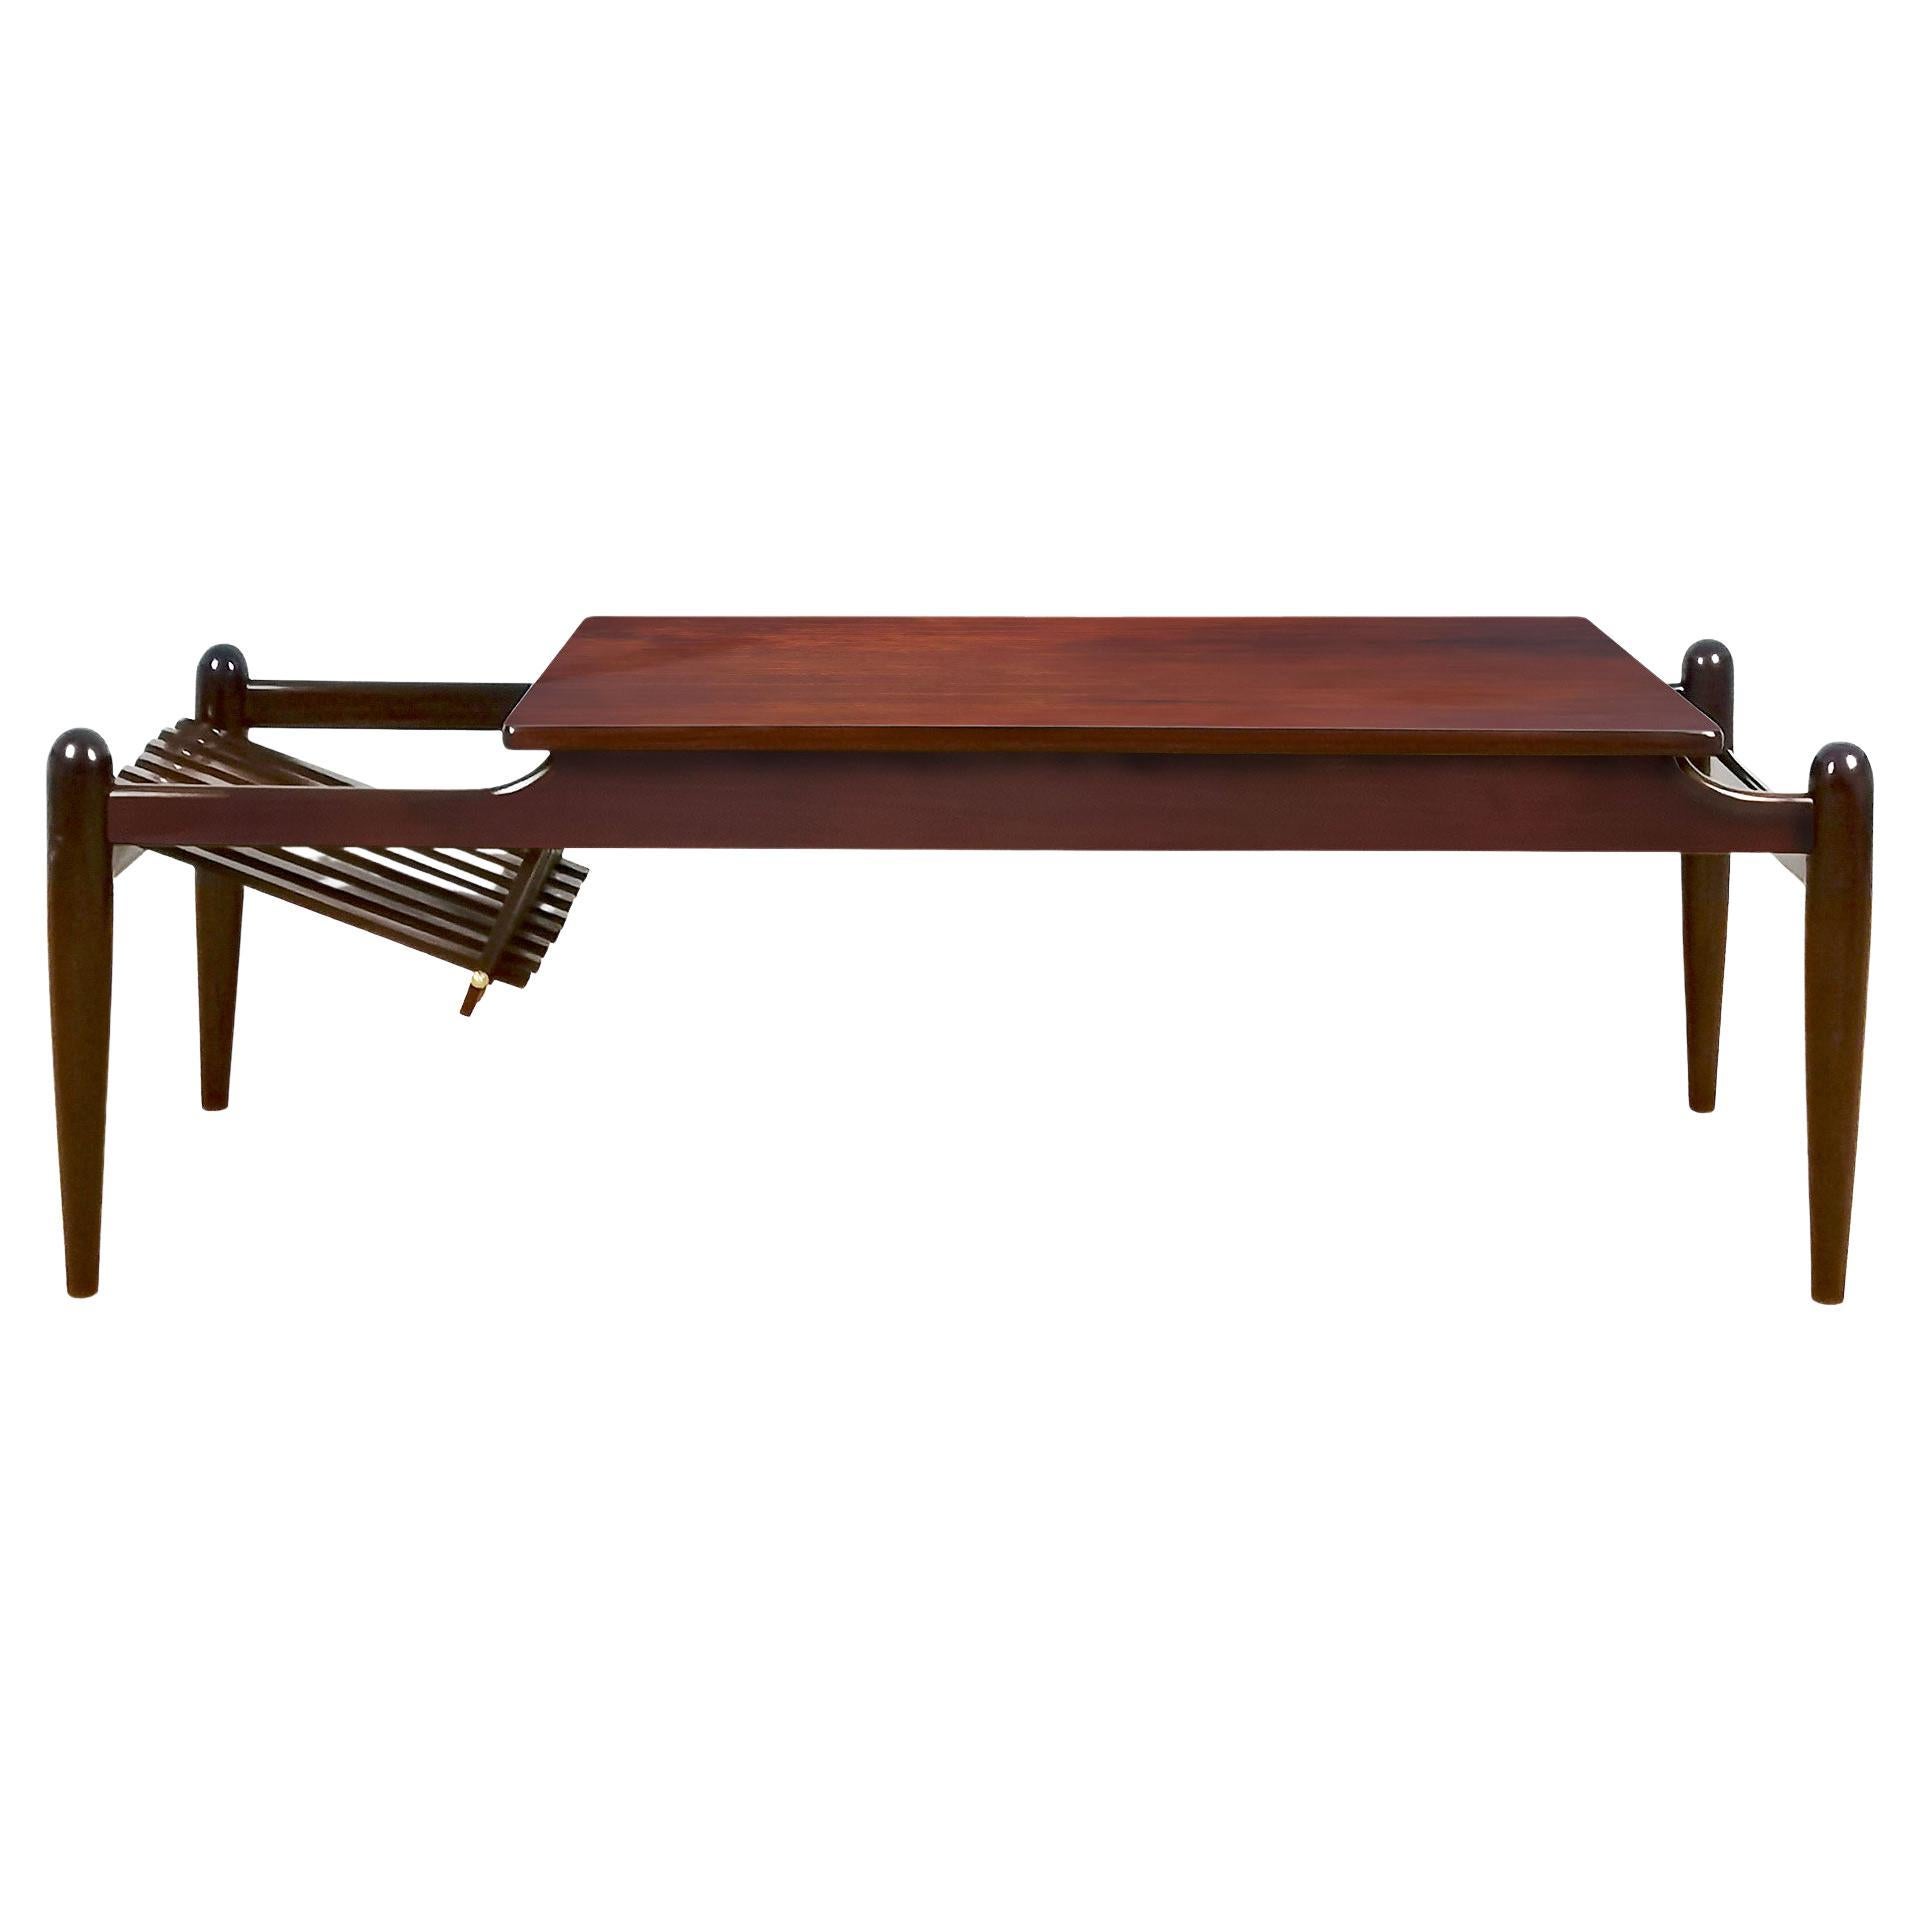 Mid-Century Modern Coffee Table with Magazine Rack, Mahogany and Brass - Italy For Sale